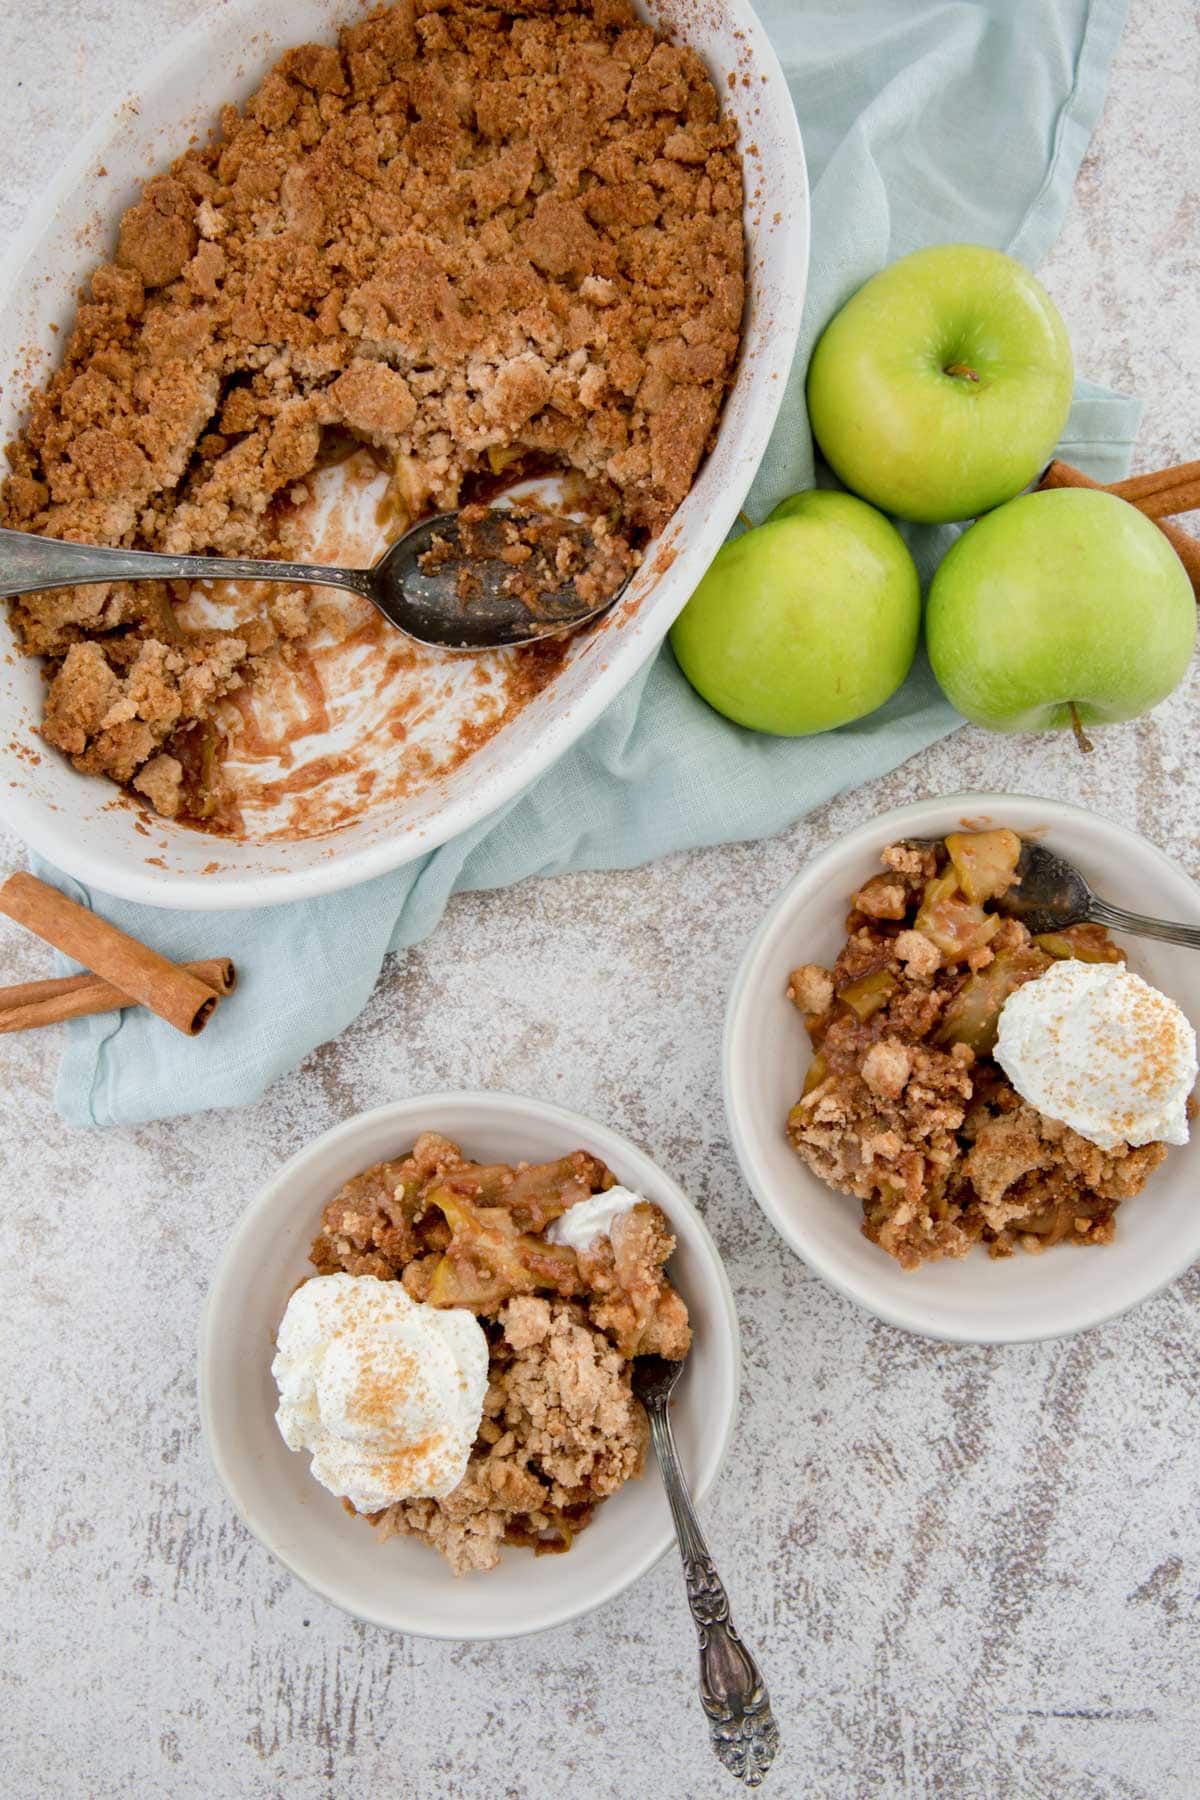 casserole dish with apples and cookie crumble topping, 2 bowls with apple cobbler and whipped cream, green apples, a spoon